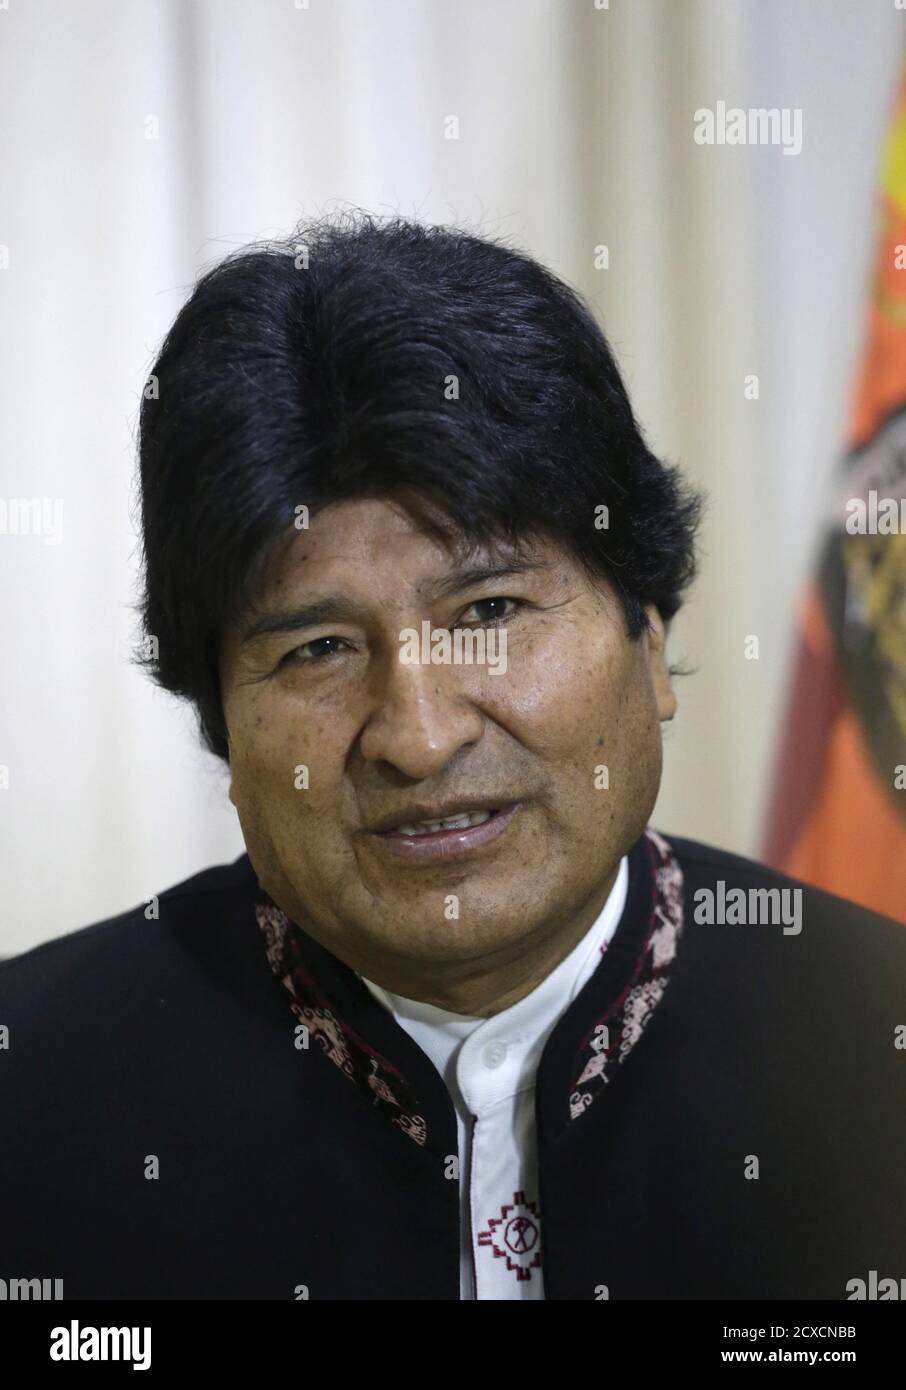 Bolivia's President Evo Morales (C) talks with Aymara indigenous people  during a ceremony in Tiawanacu, about 70 km (43 miles) north of La Paz,  October 11, 2006. Representatives of indigenous groups from